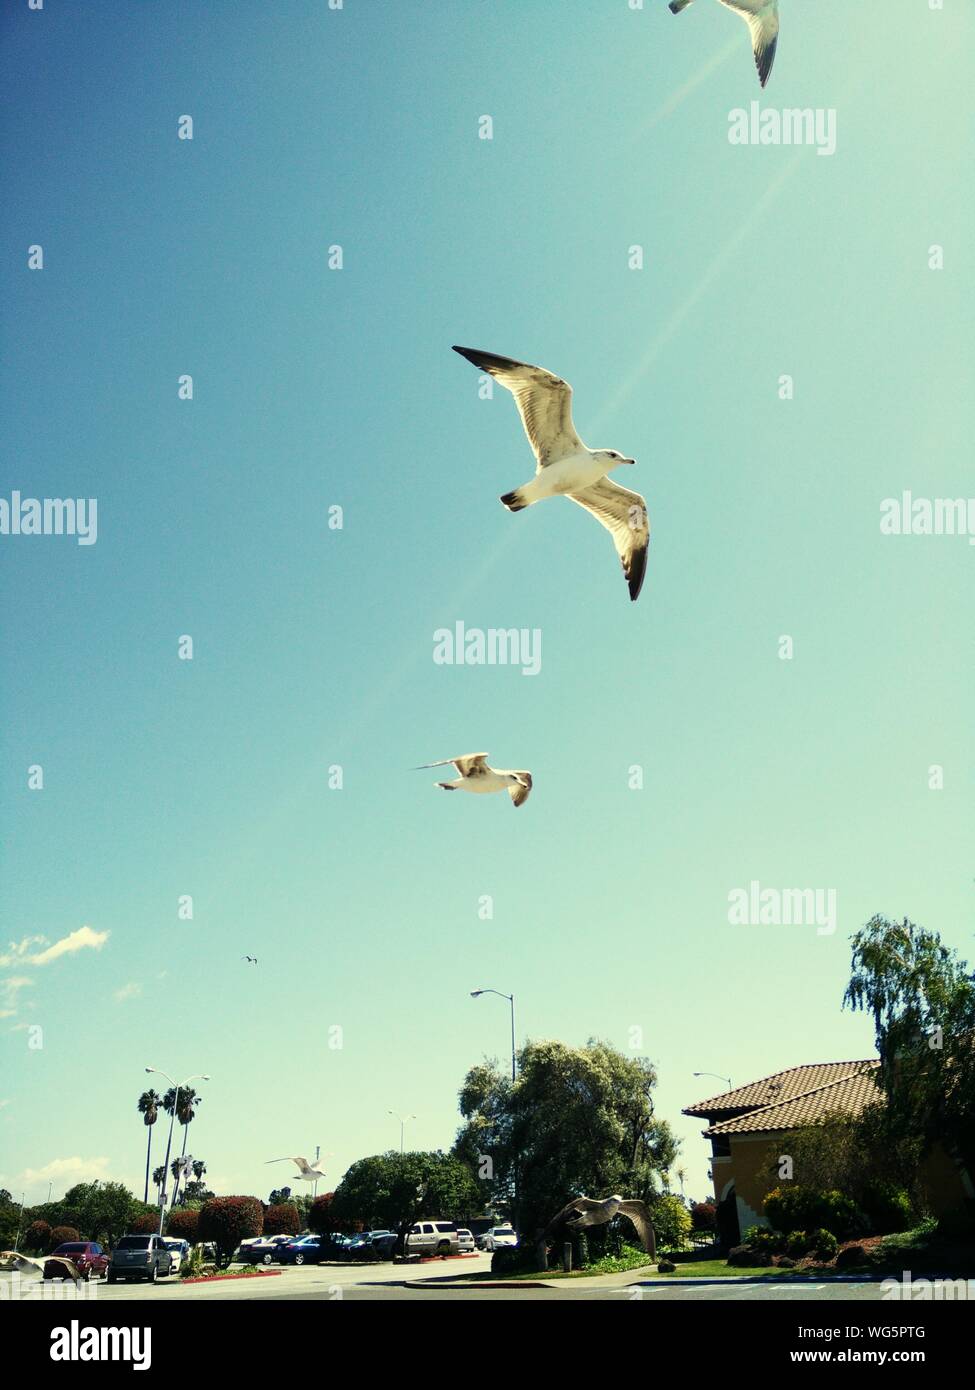 Low Angle View Of Seagull Flying Against Blue Sky Stock Photo